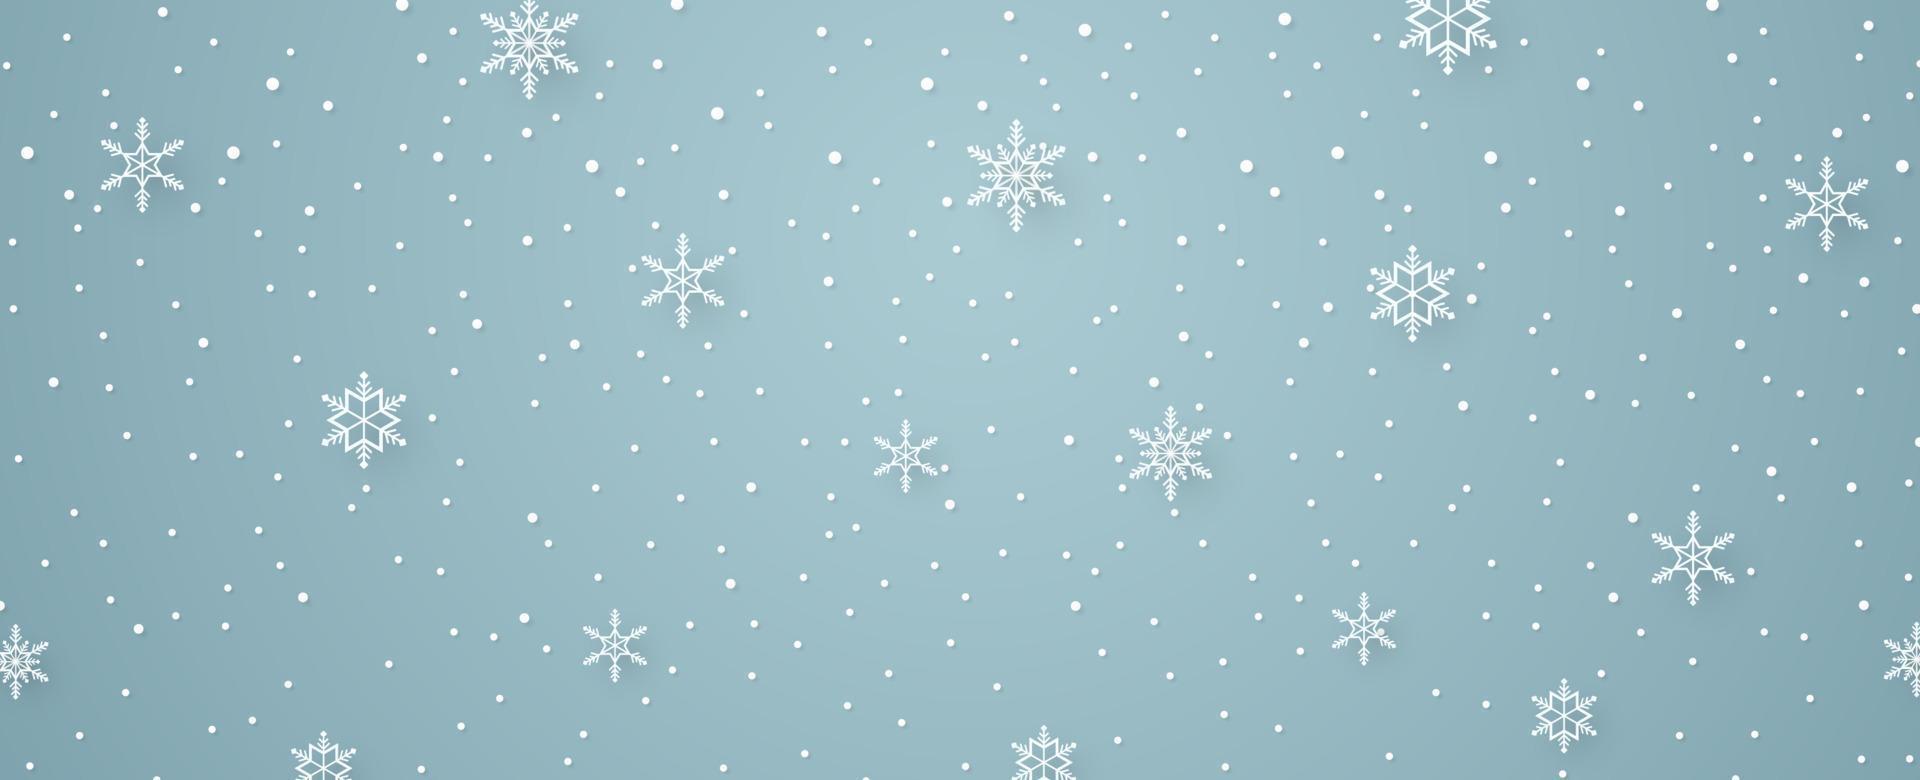 Merry Christmas, snowflakes and snowfall background in paper art style vector